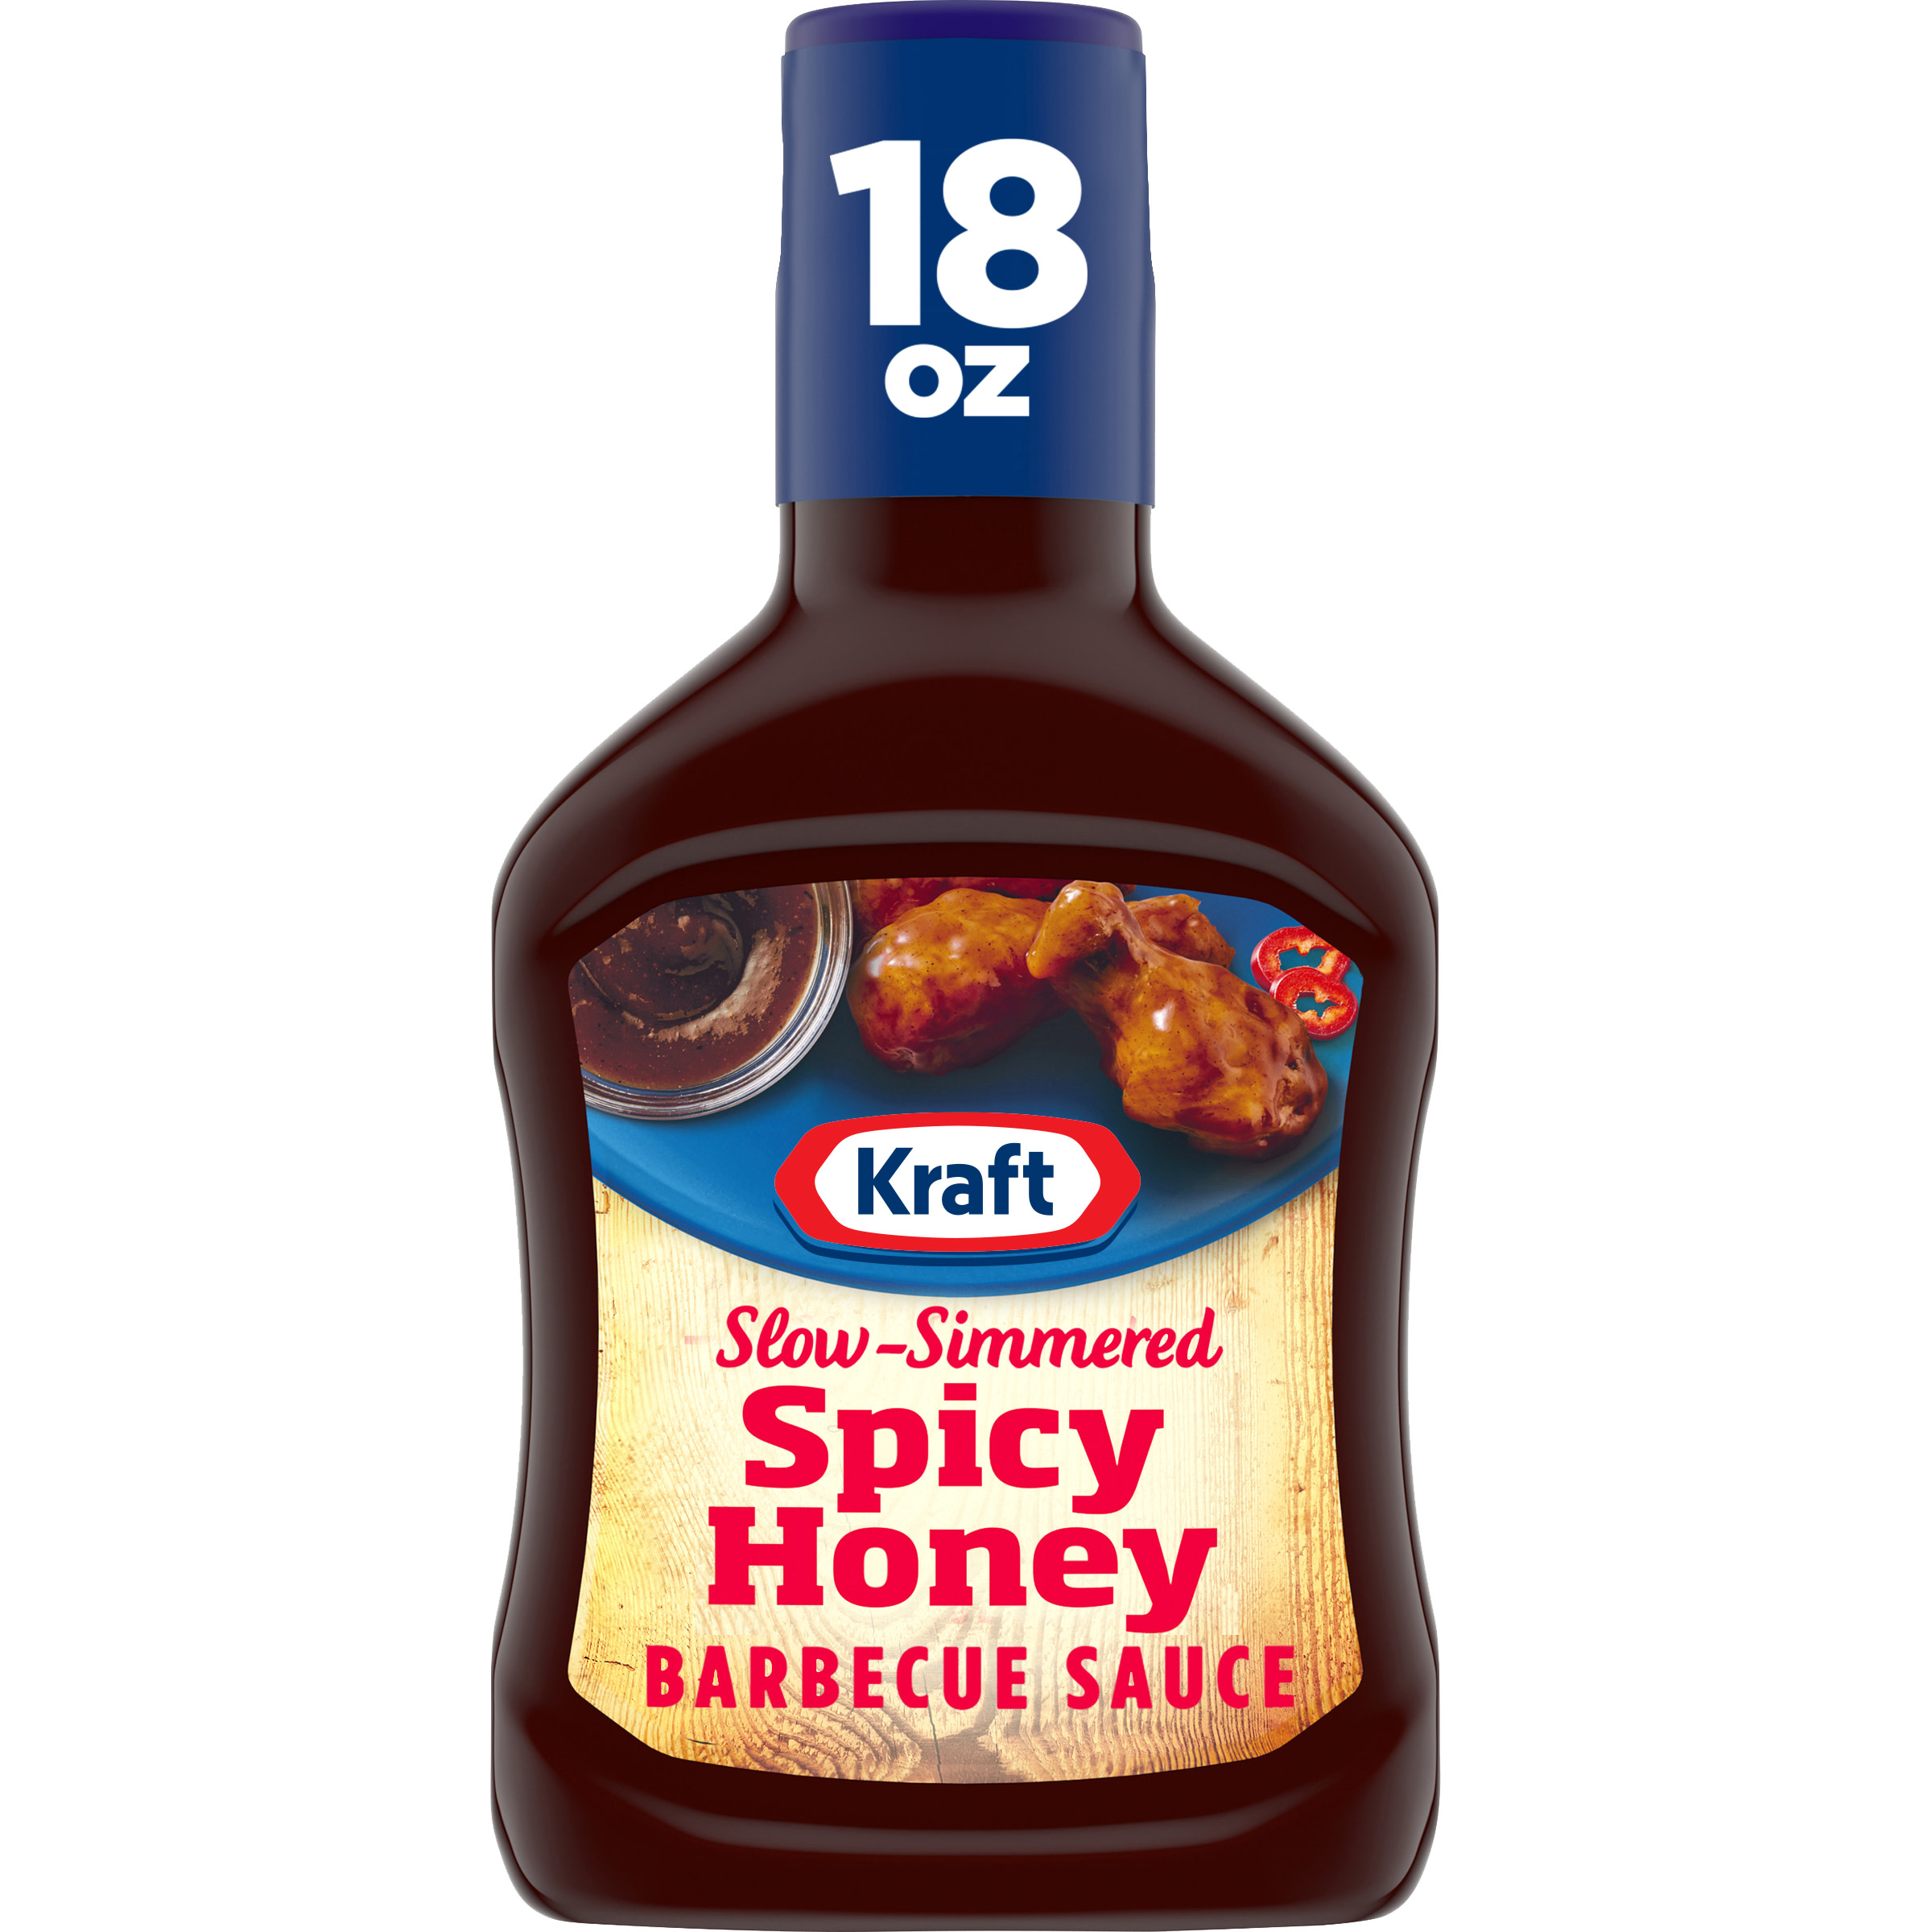 Kraft Slow-Simmered Spicy Honey Barbecue Sauce Bottle and Dip, 18 oz ...